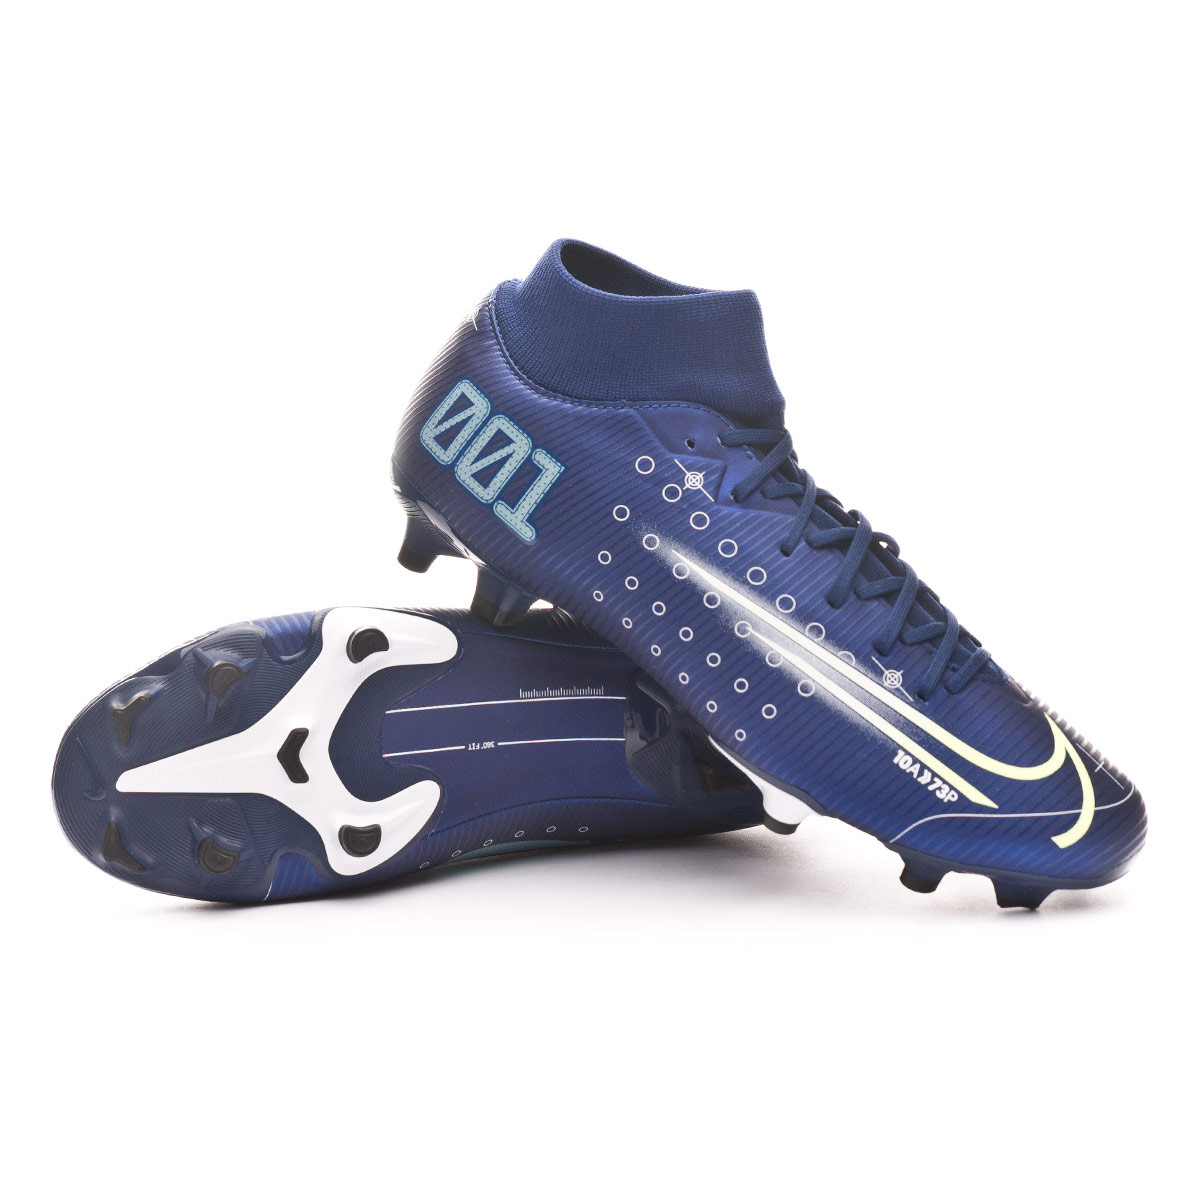 Nike Jr Superfly 6 Academy GS TF Fitness Chaussures.